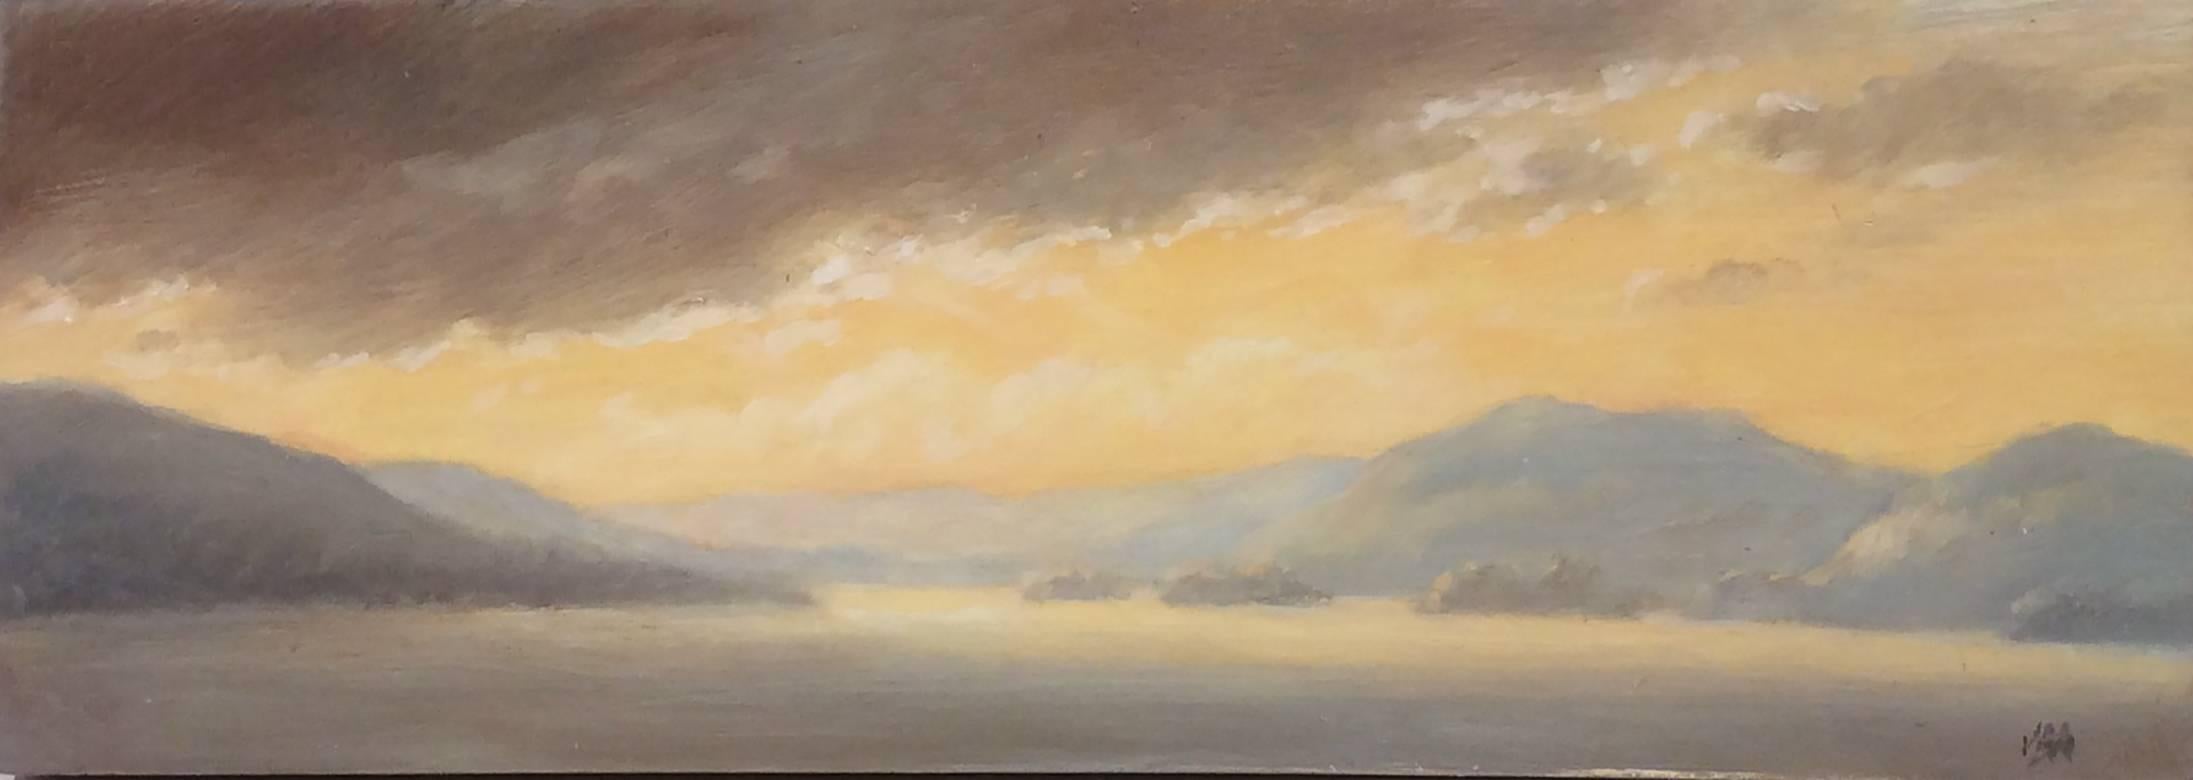 Jane Bloodgood-Abrams Landscape Painting - Storm Clearing: Small Oil Painting of Yellow Sky with Clouds Over Blue Mountains